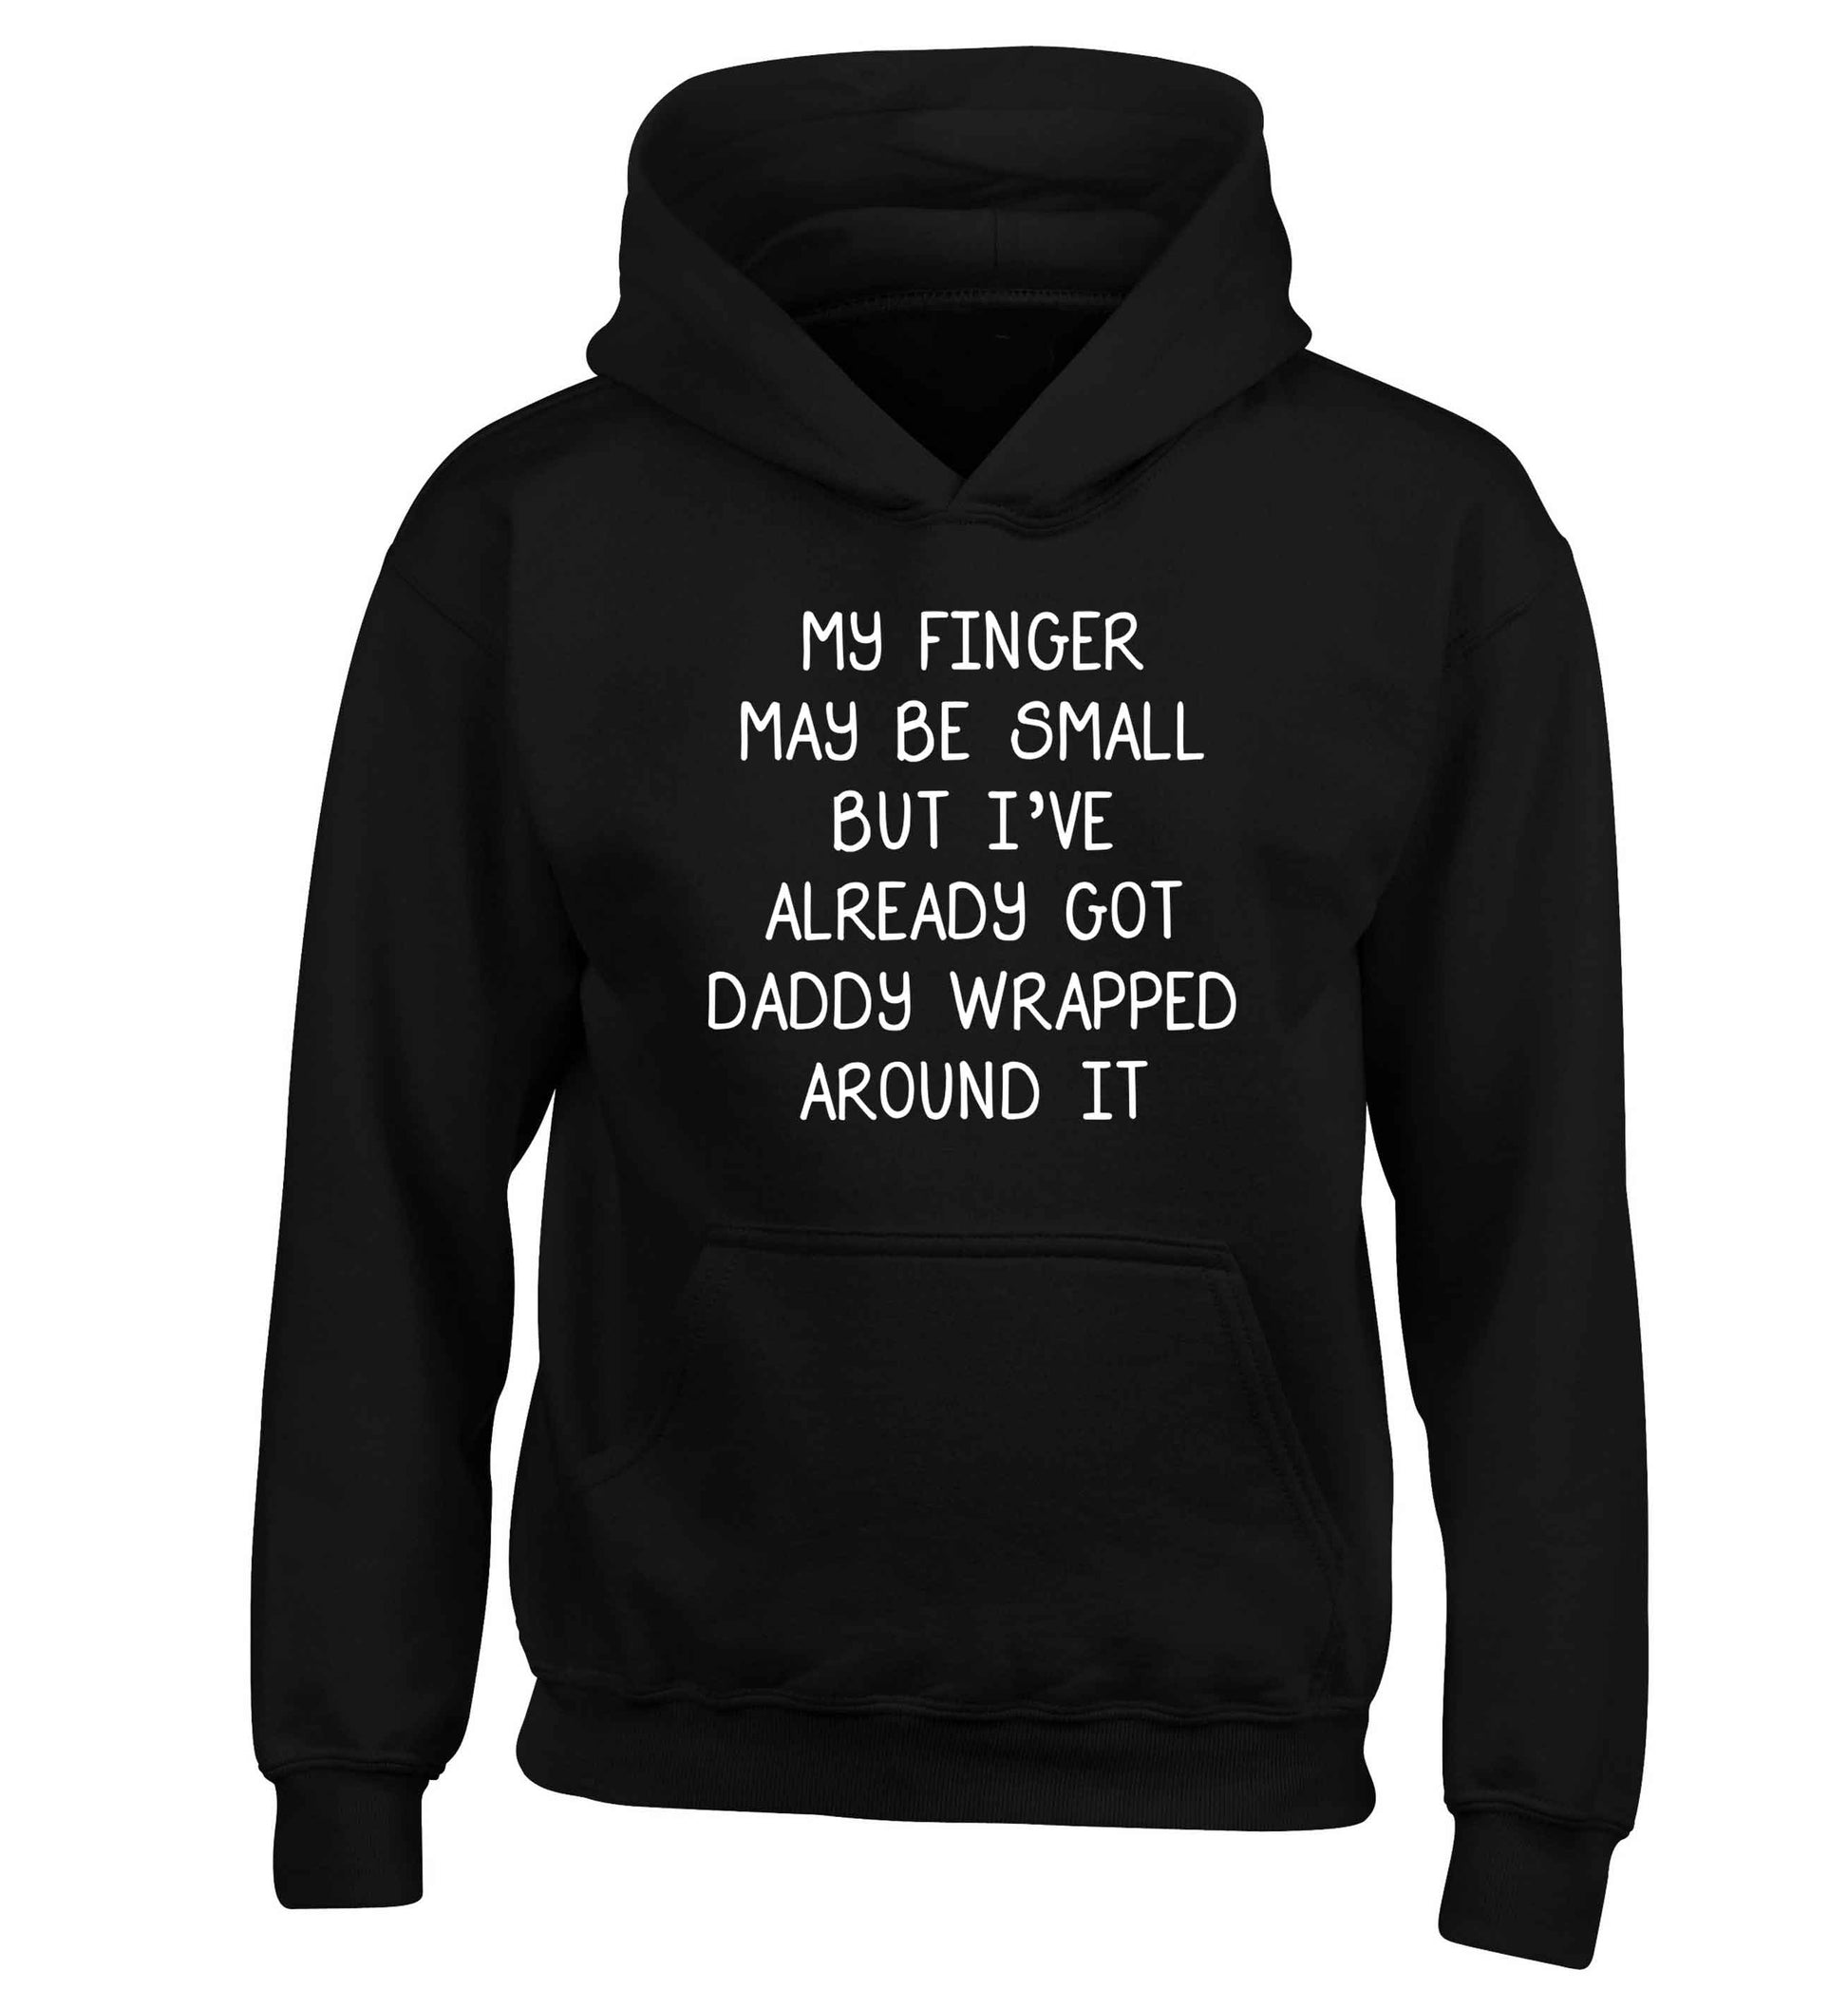 My finger may be small but I've already got daddy wrapped around it children's black hoodie 12-13 Years